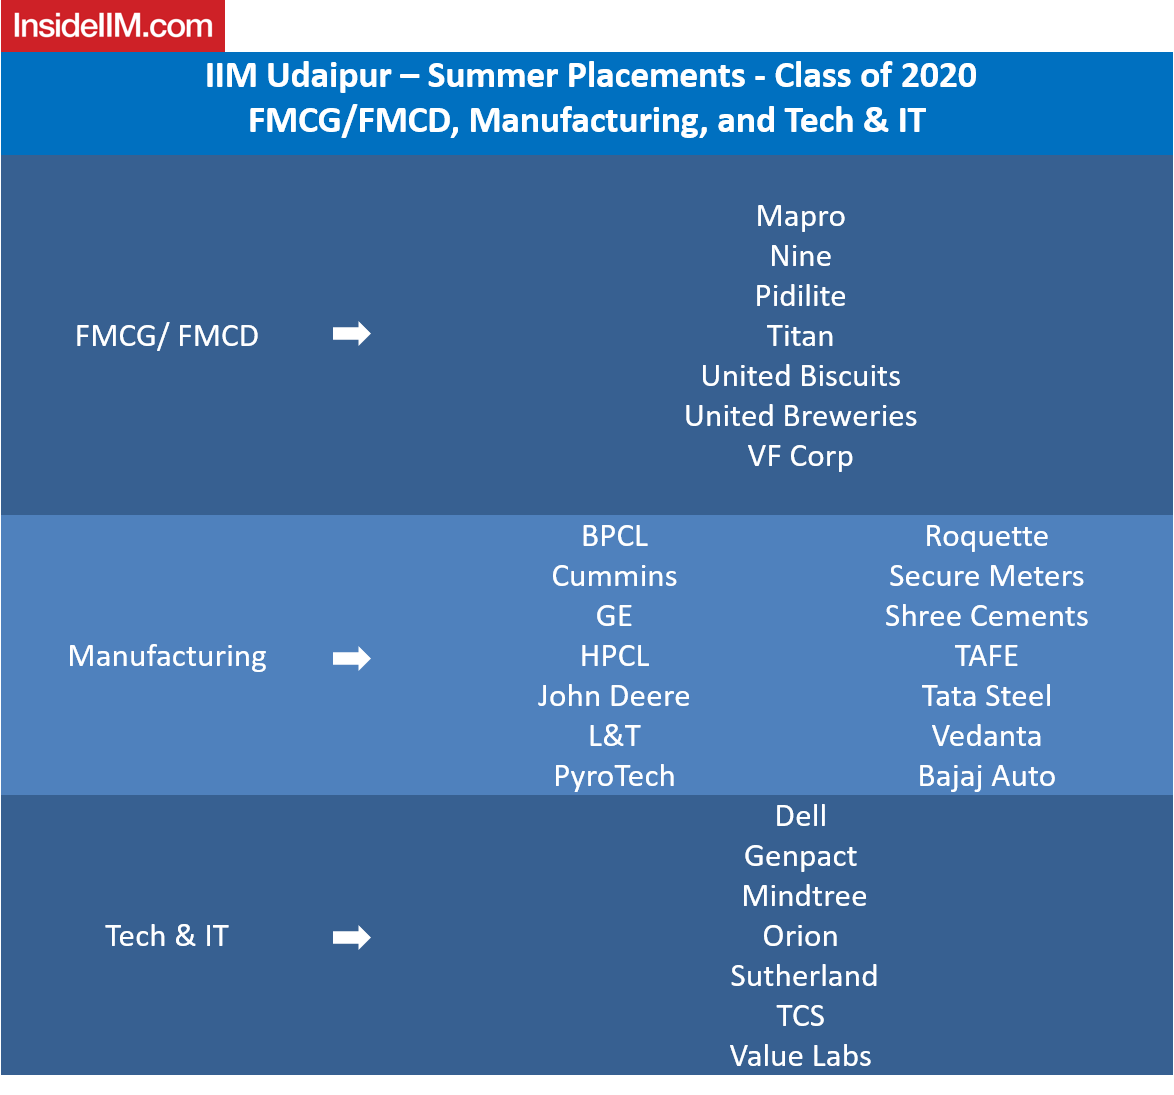 IIM Udaipur Placements 2019 - companies: FMCG/FMCD, Manufacturing, Tech and IT